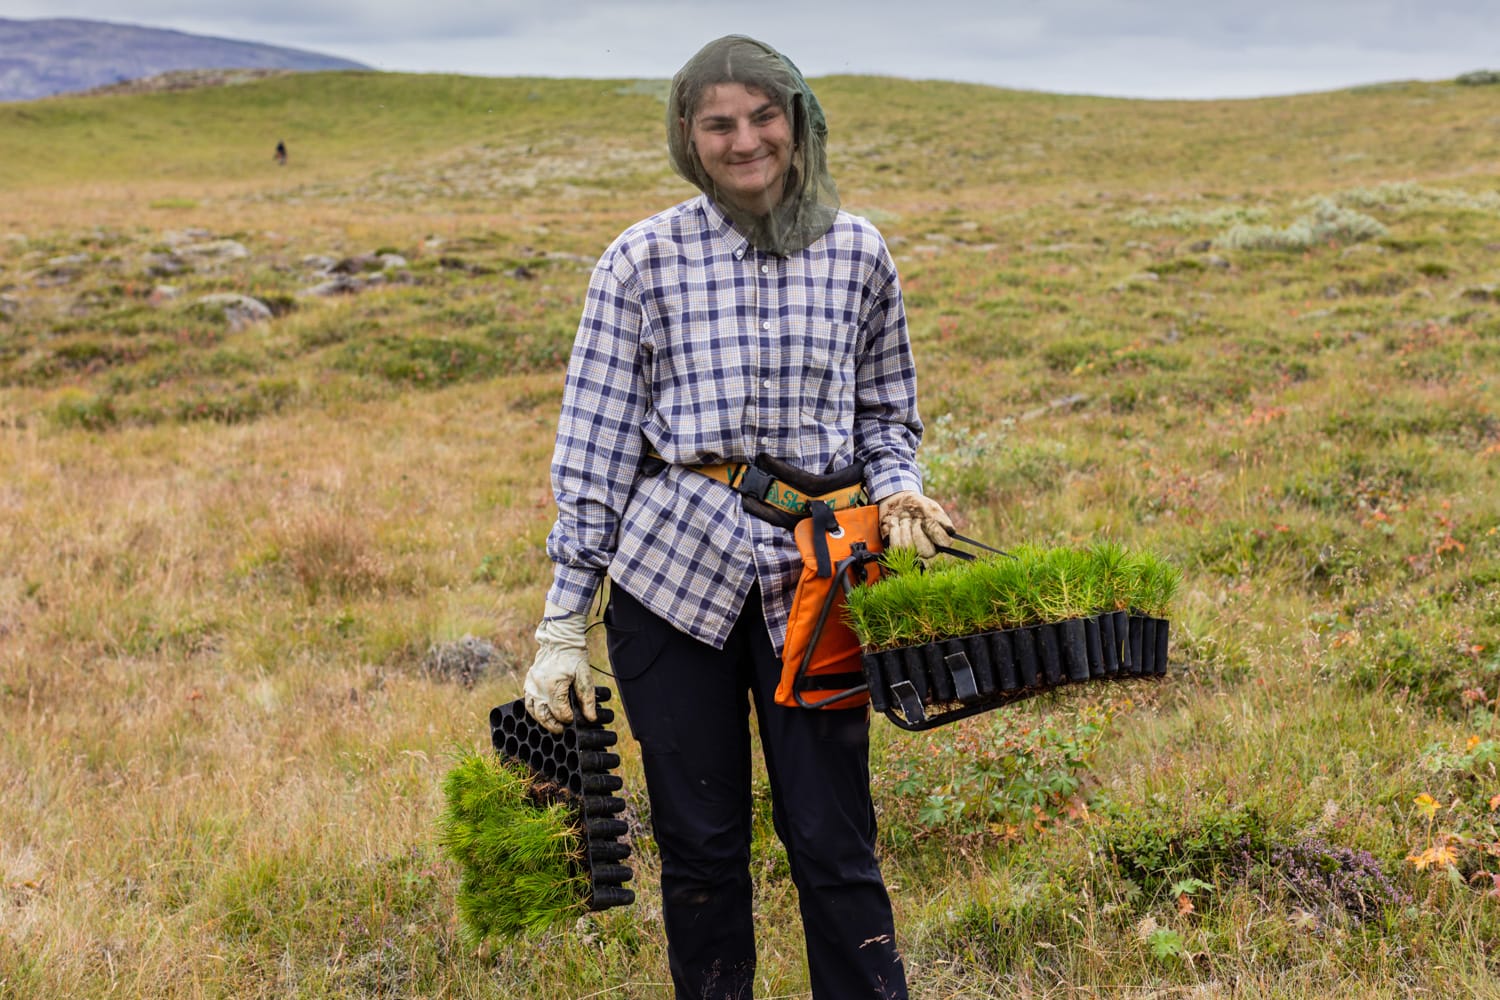 an image of a person wearing a checked shirt and holding the tree sprigs ready for planting